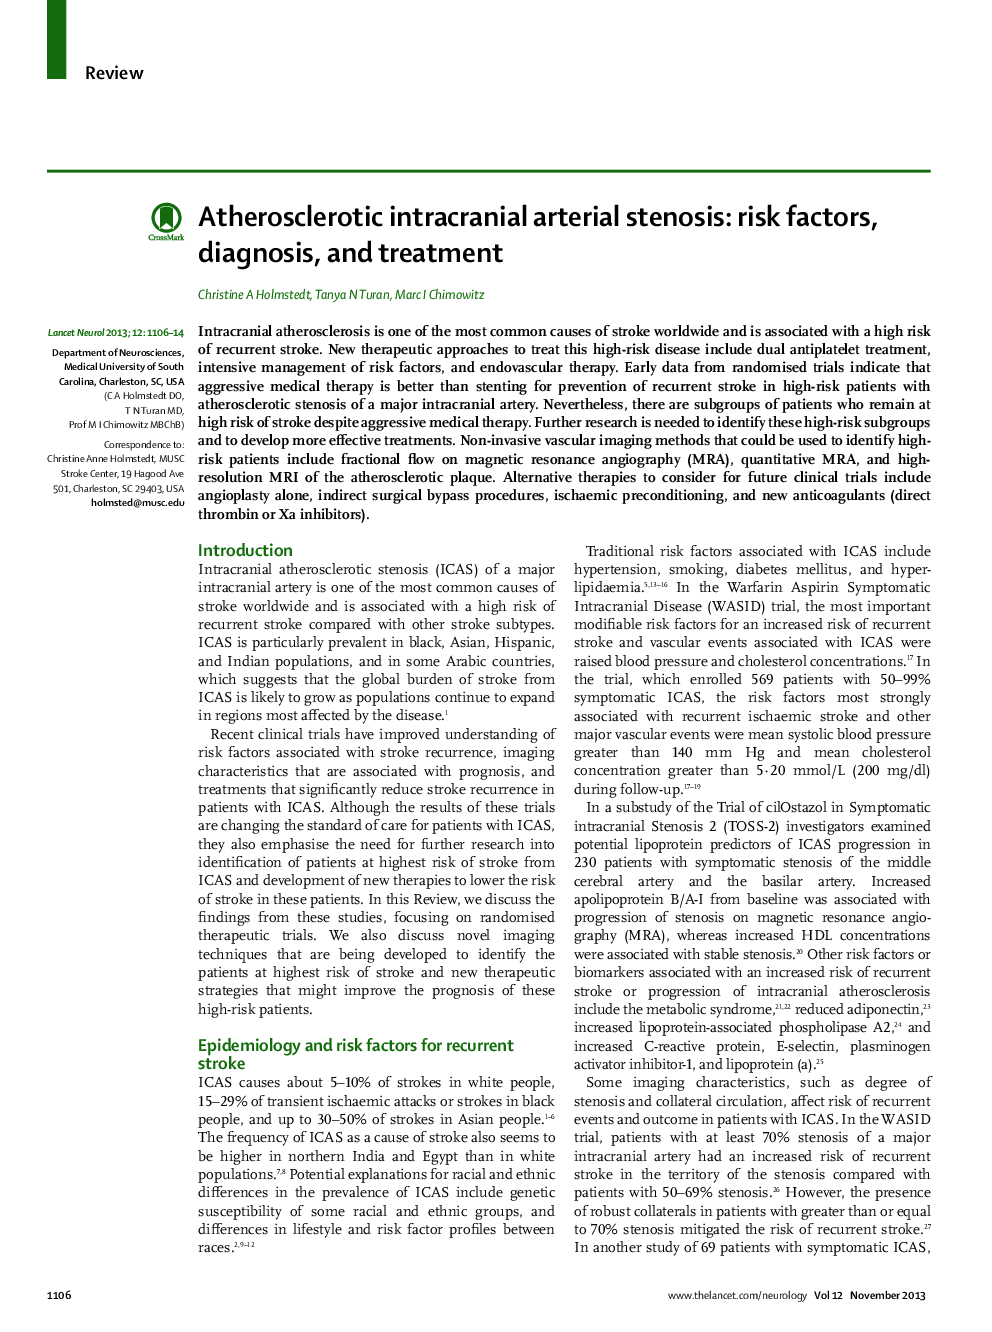 Atherosclerotic intracranial arterial stenosis: risk factors, diagnosis, and treatment